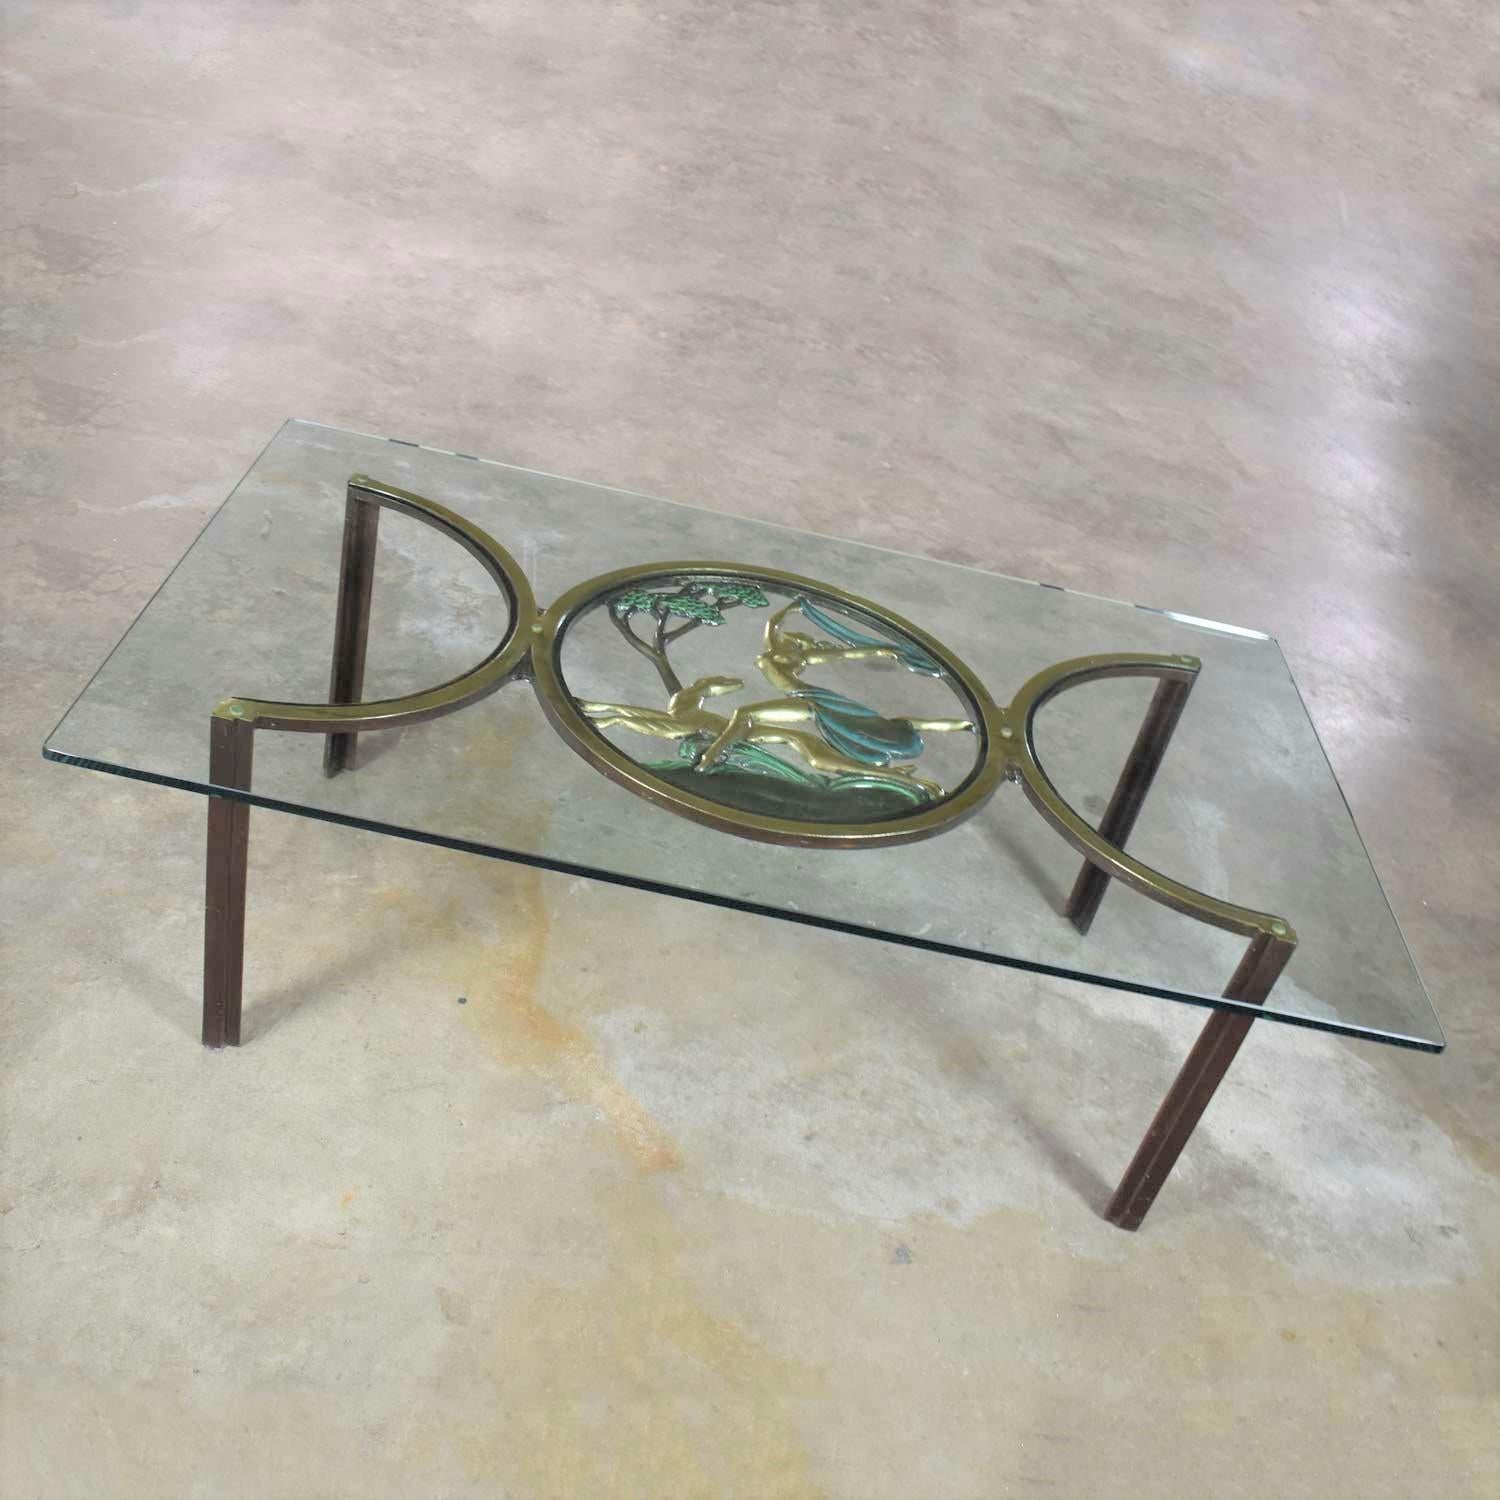 Amazing Art Deco style coffee table or cocktail table in bronze with a center medallion of Diana the Huntress and 5/8” glass top with radius corners. It is in wonderful vintage condition. The top may have small scratches. Please see photos, circa